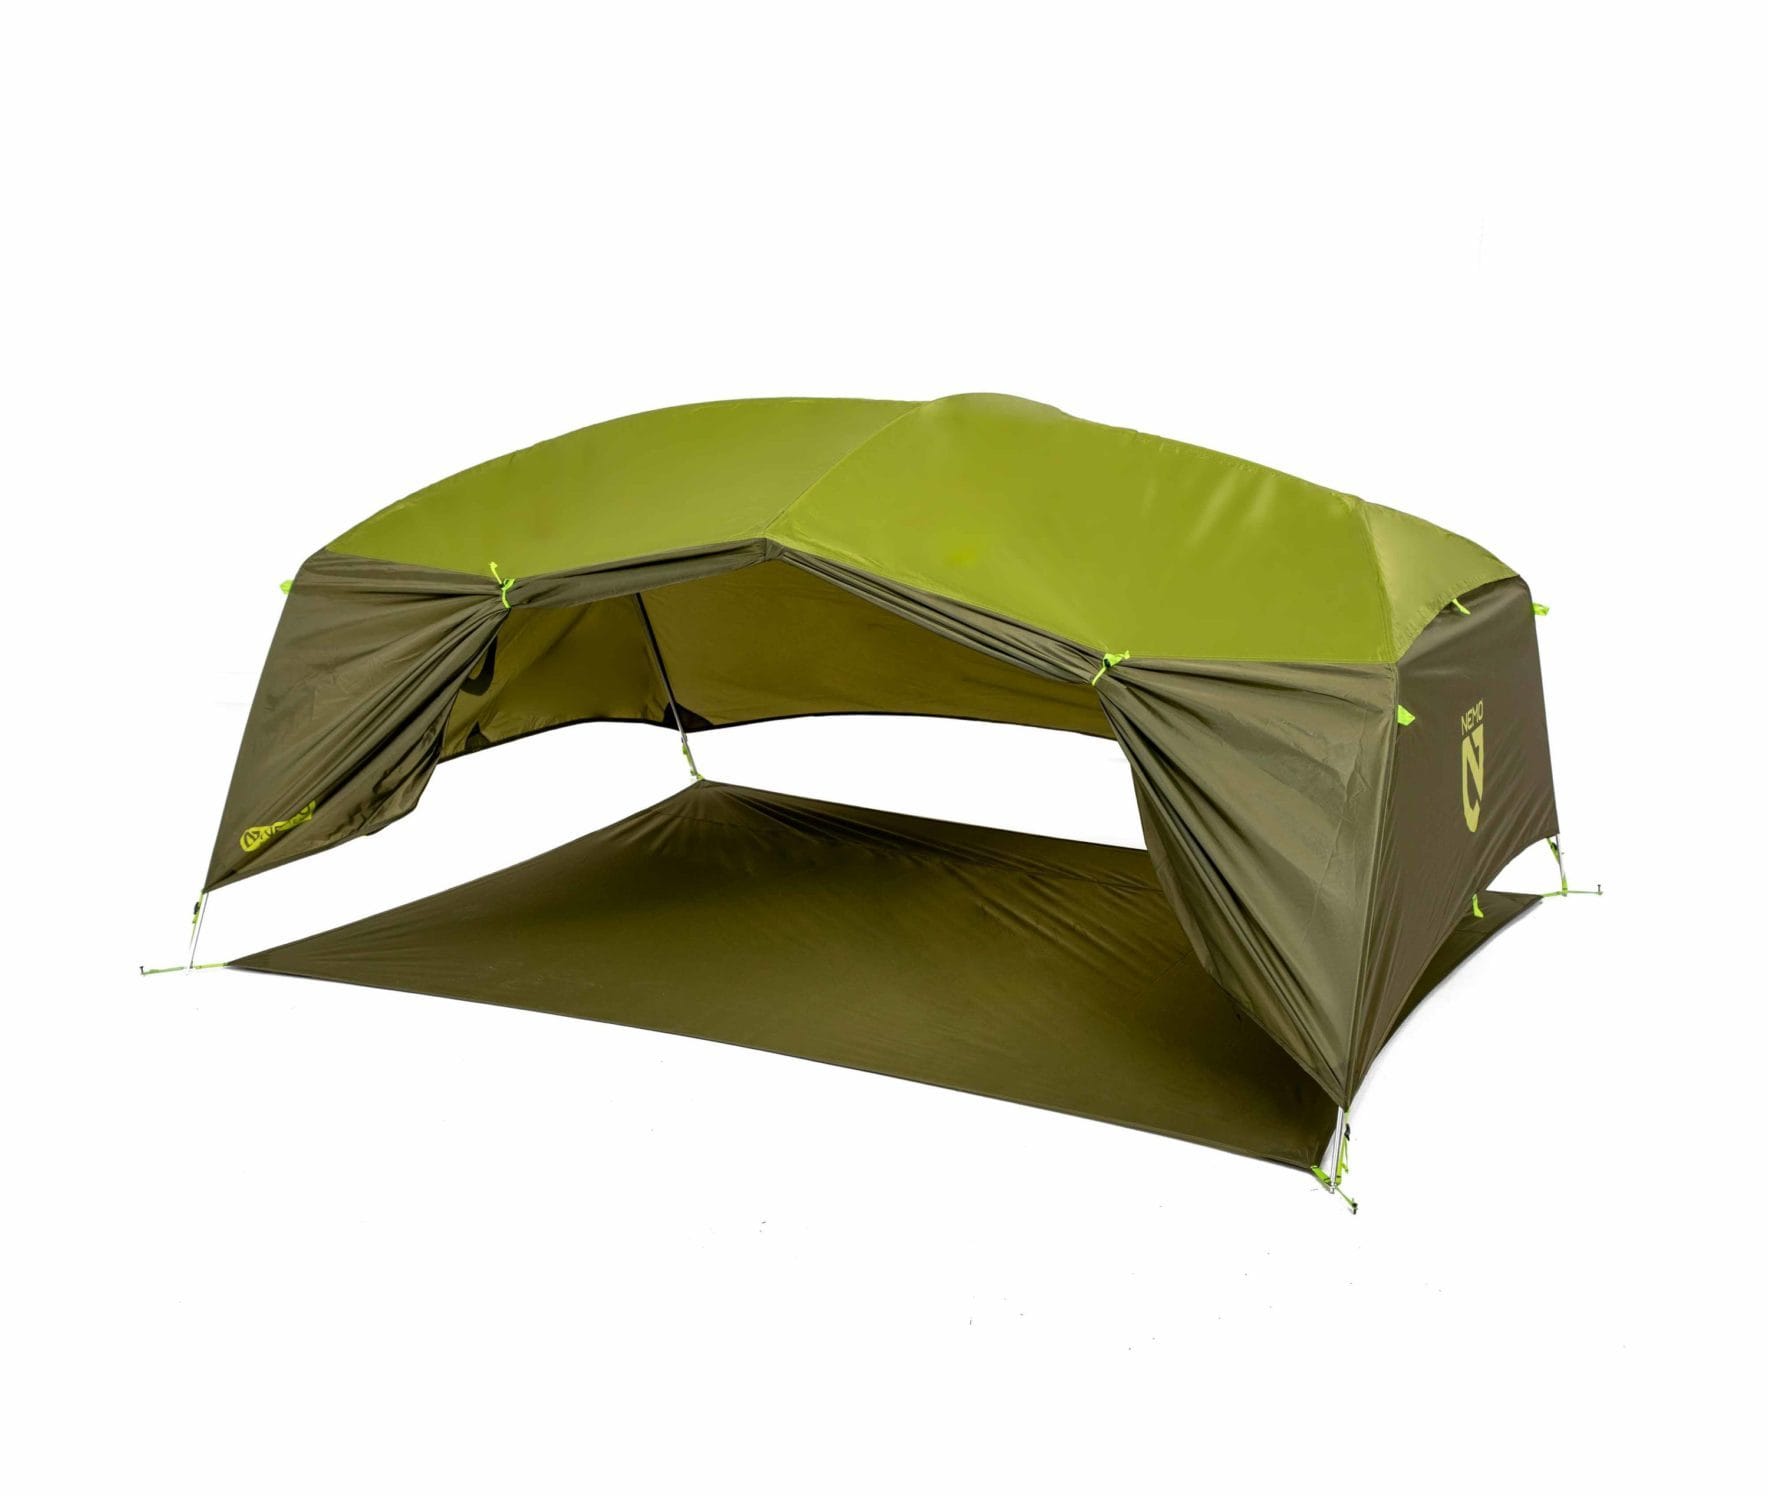 Nemo Tent Aurora Backpacking Tent & Footprint  - Oz Backcountry